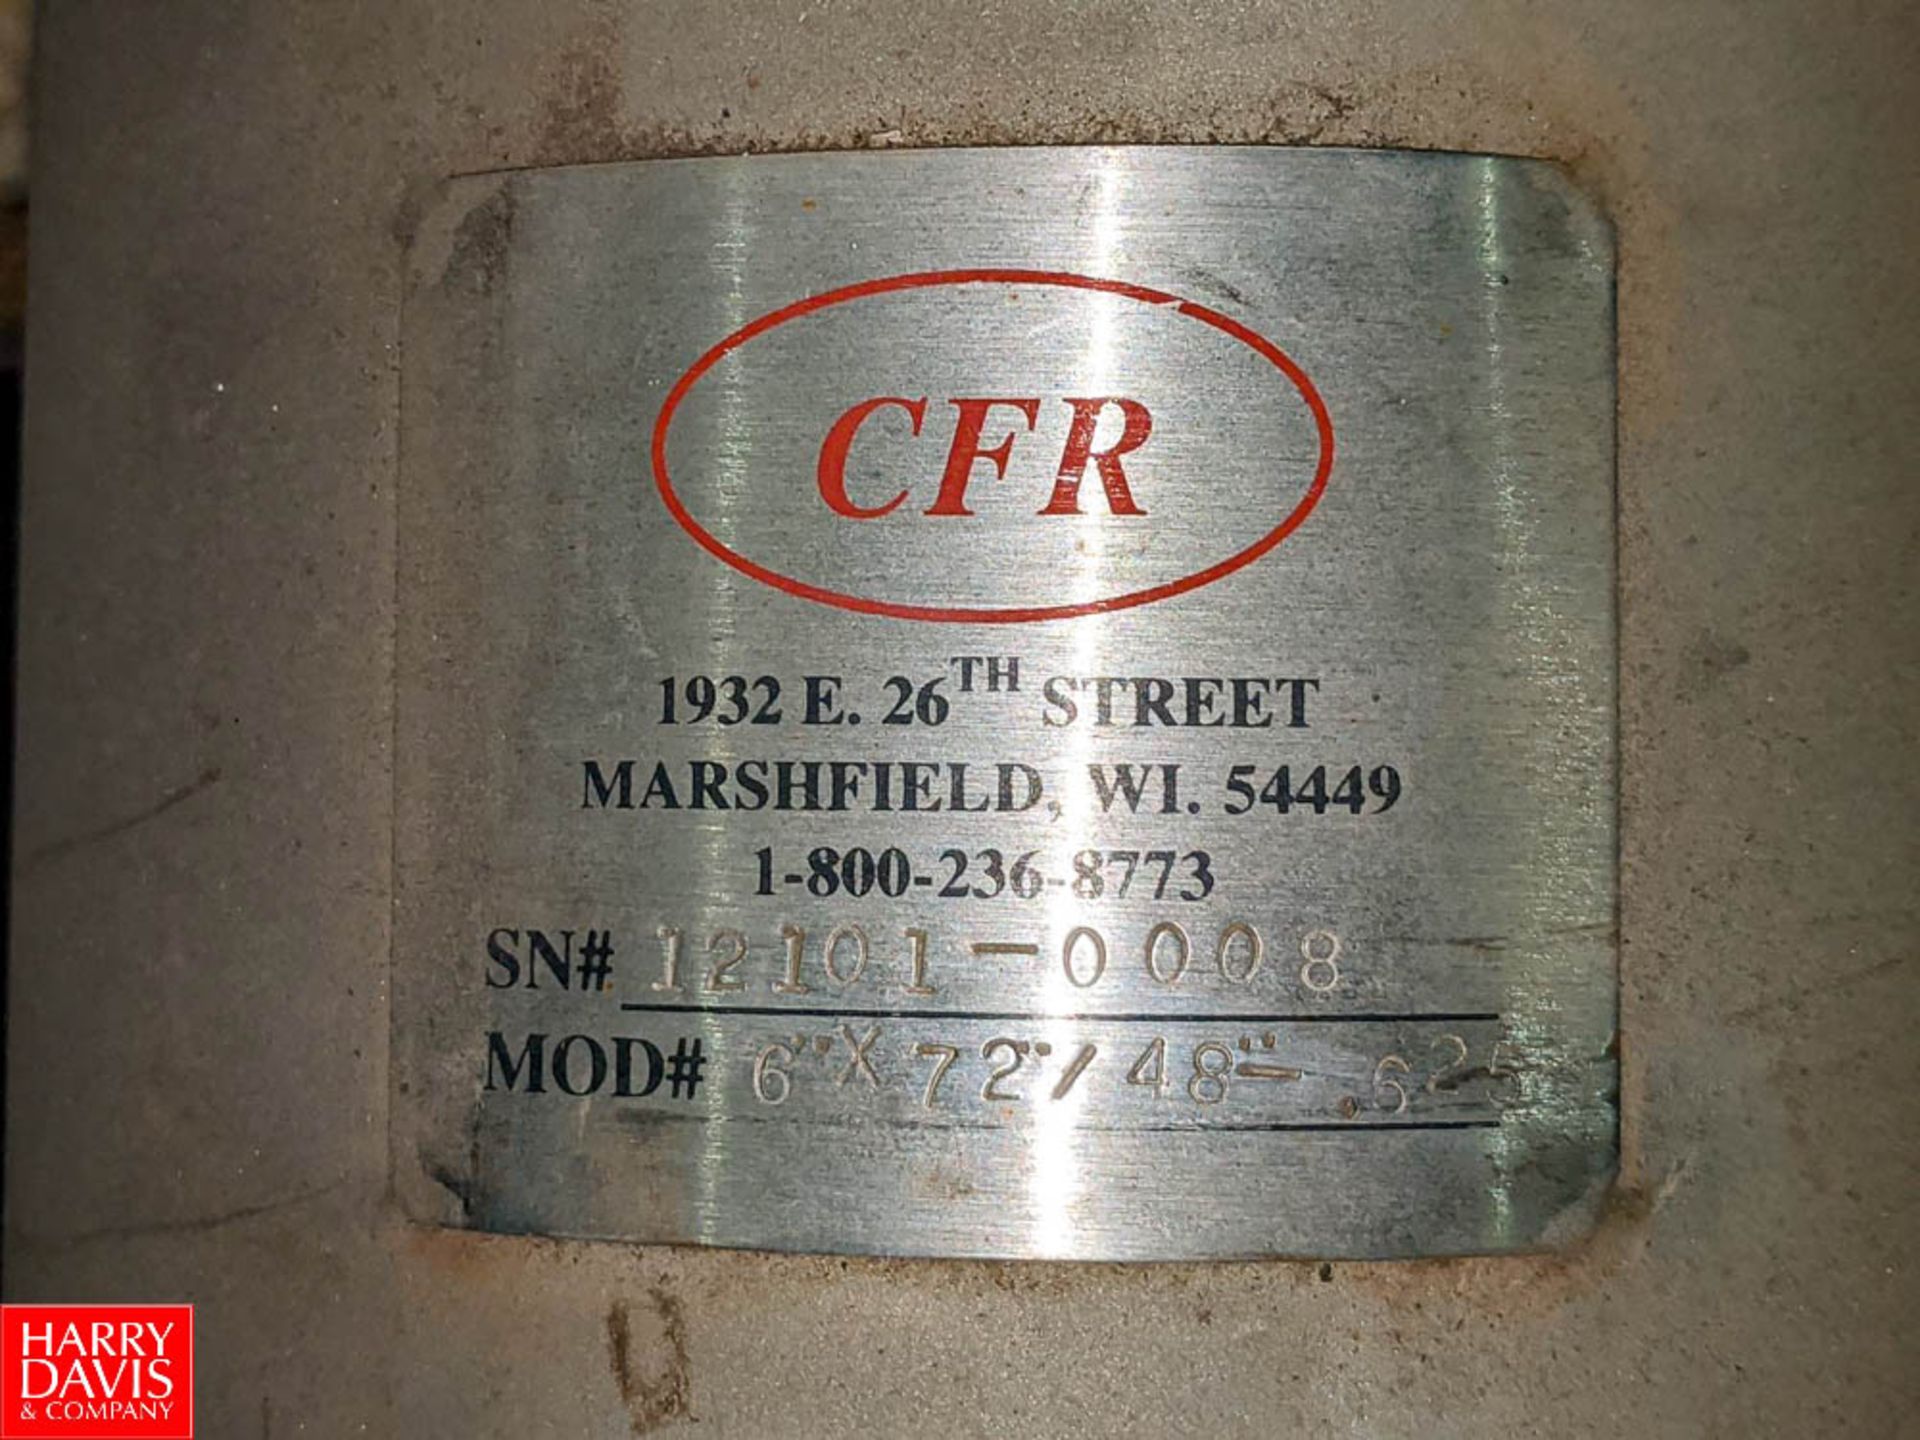 CFR S/S Shell/Tube Filter Model: 6"x72"/48"-.625 SN: 12101-0008 (Loc. Dock Traffic Area) Rigging - Image 2 of 2